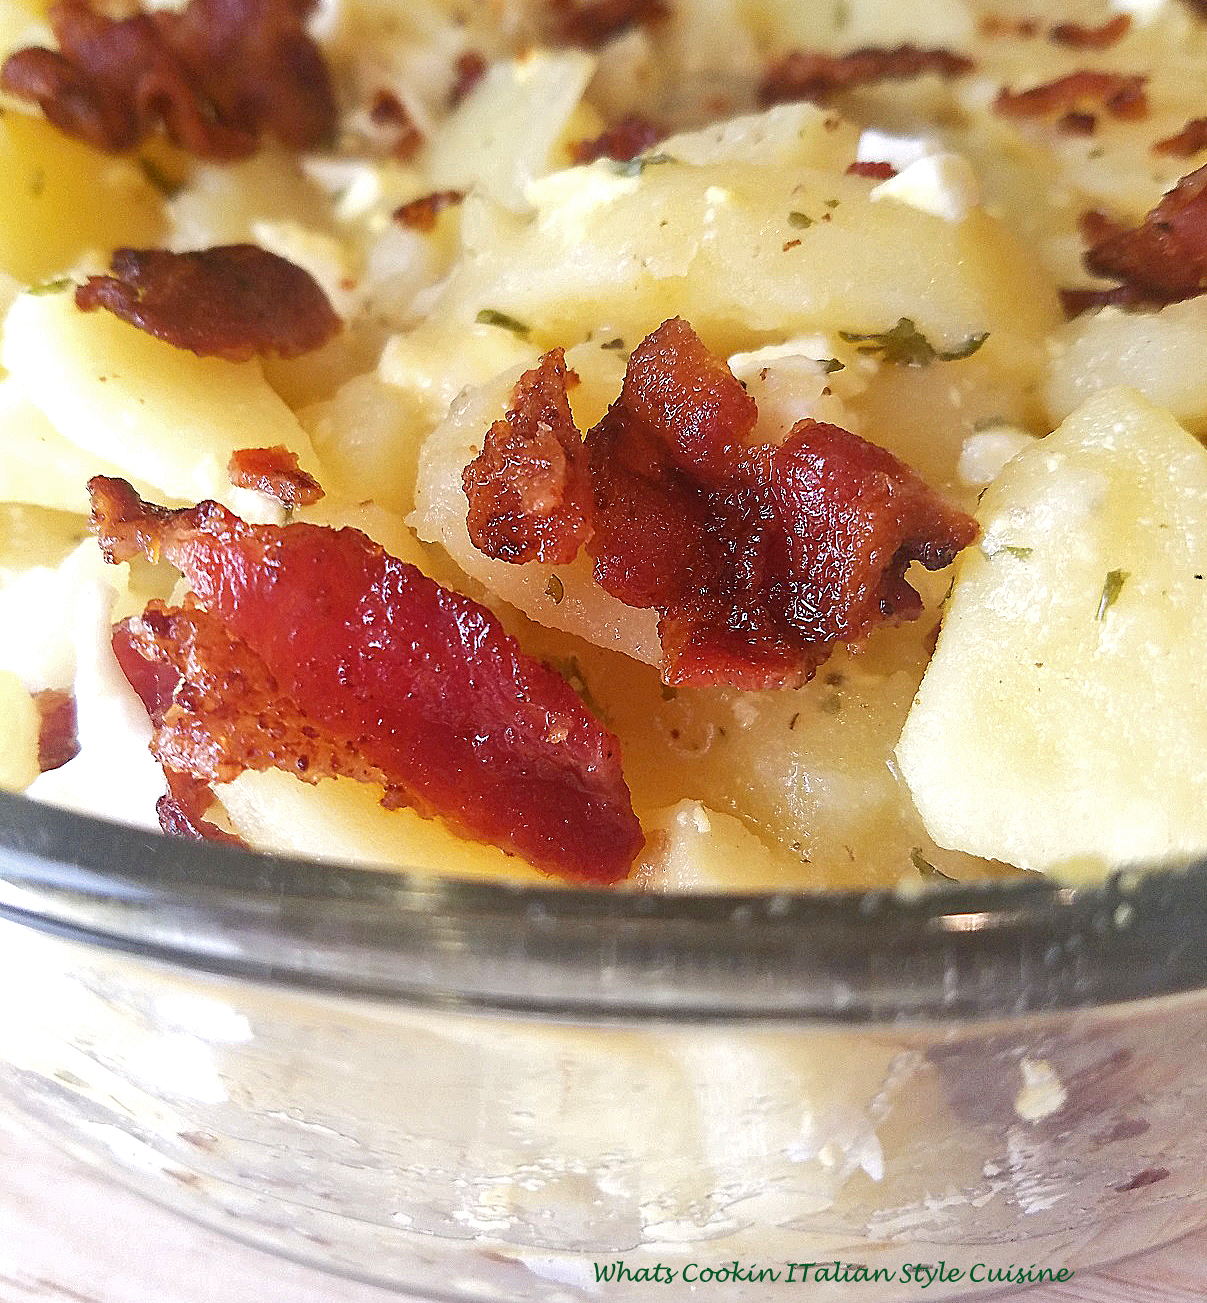 this is a cheese, bacon, sour cream potato casserole in a glass see through bowl